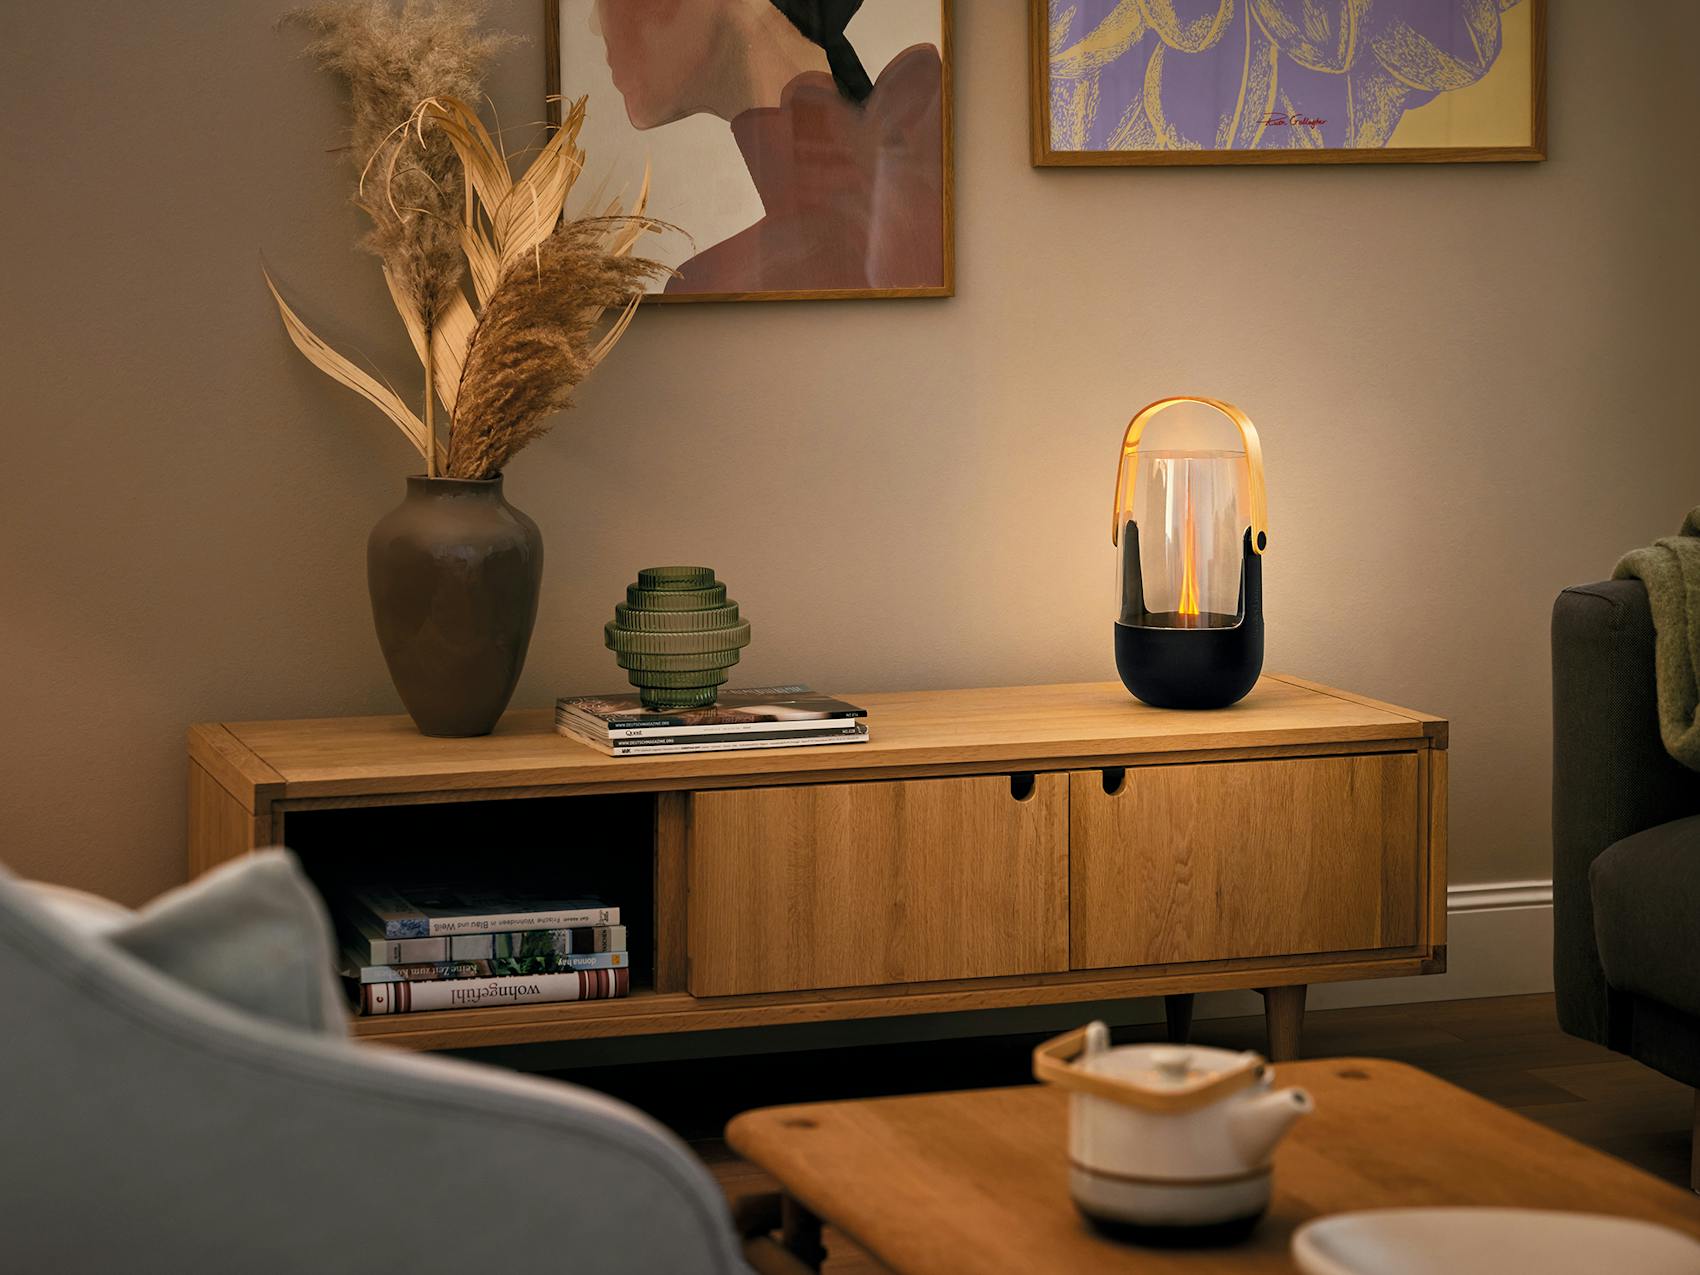 Sophie aroma diffuser and lantern from Stadler Form on a sideboard